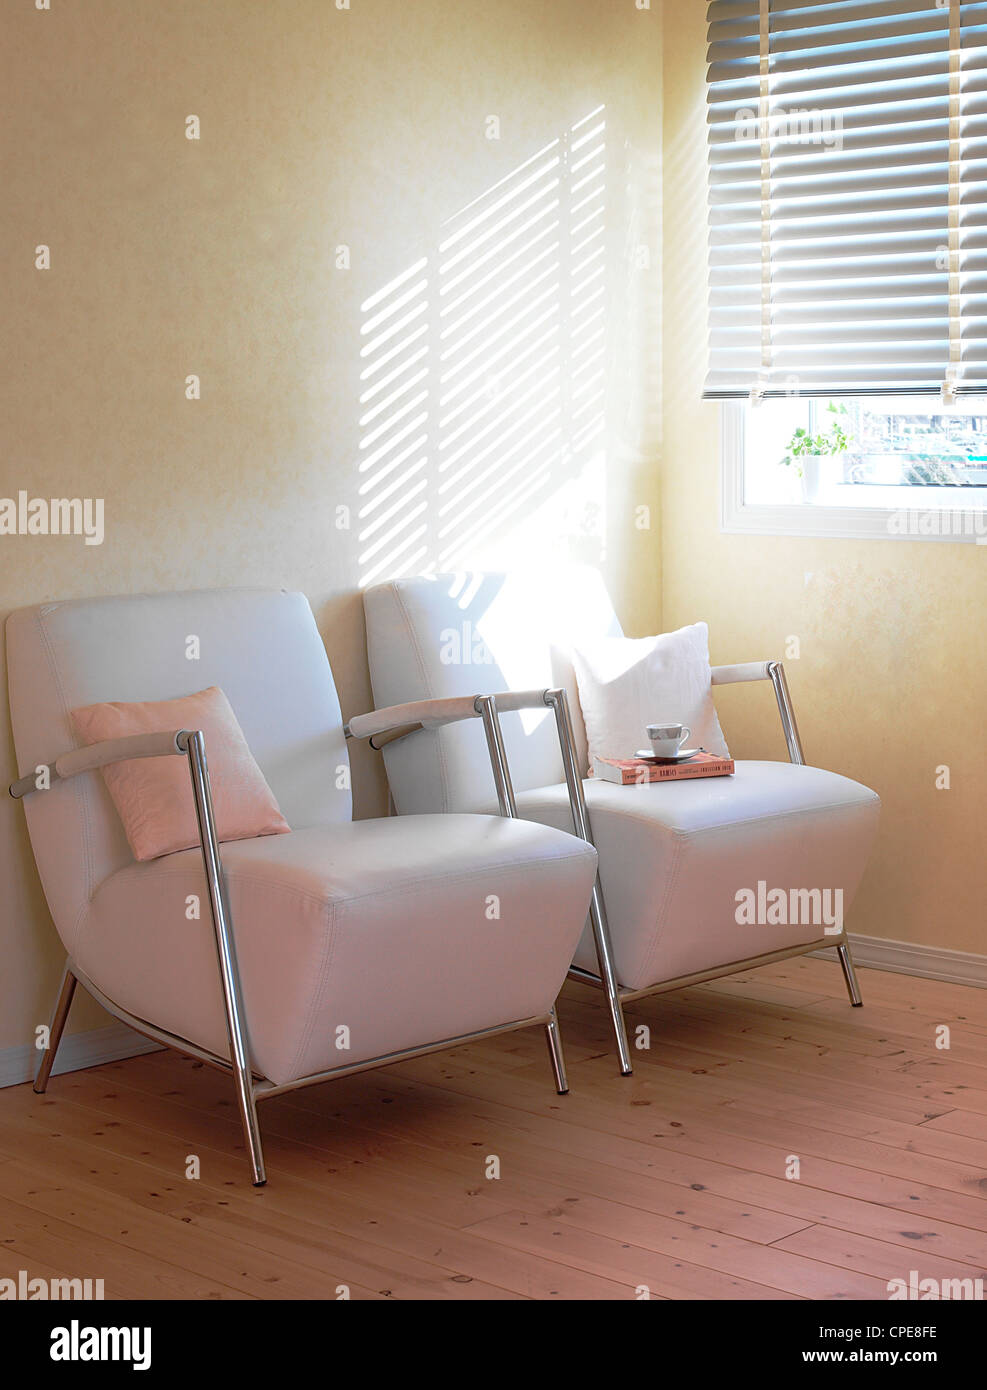 Easy Chairs With Sunlight Coming From Window Blinds Stock Photo